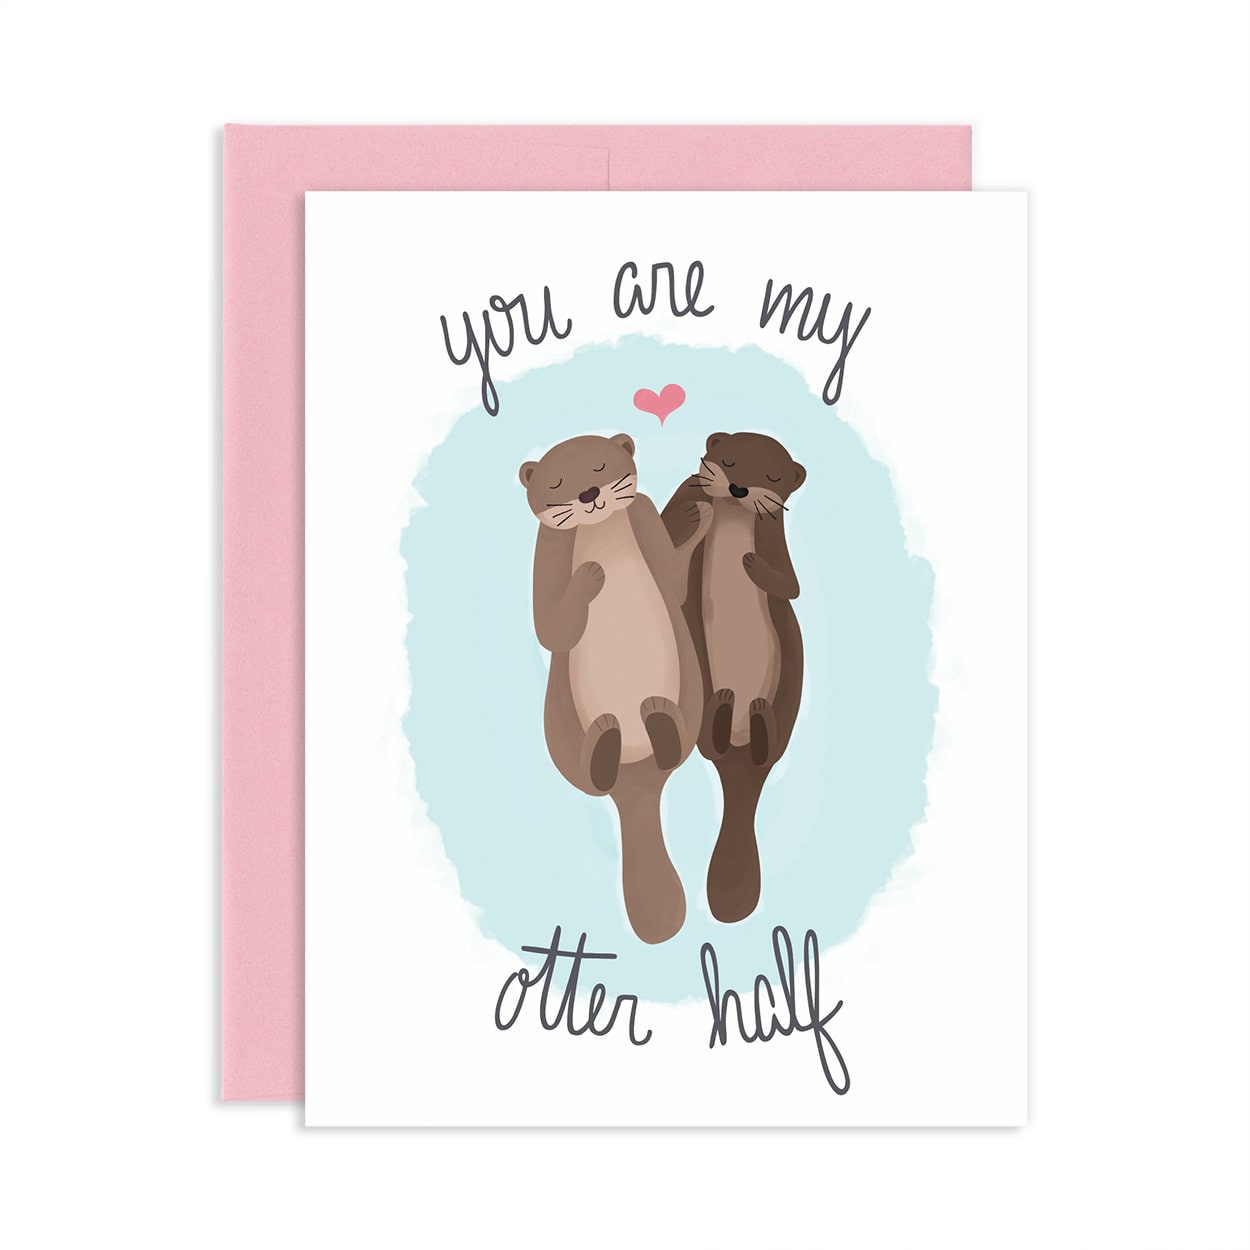 ADORABLE Otter Half Anniversary Card Love Valentine's Day Thinking Of You